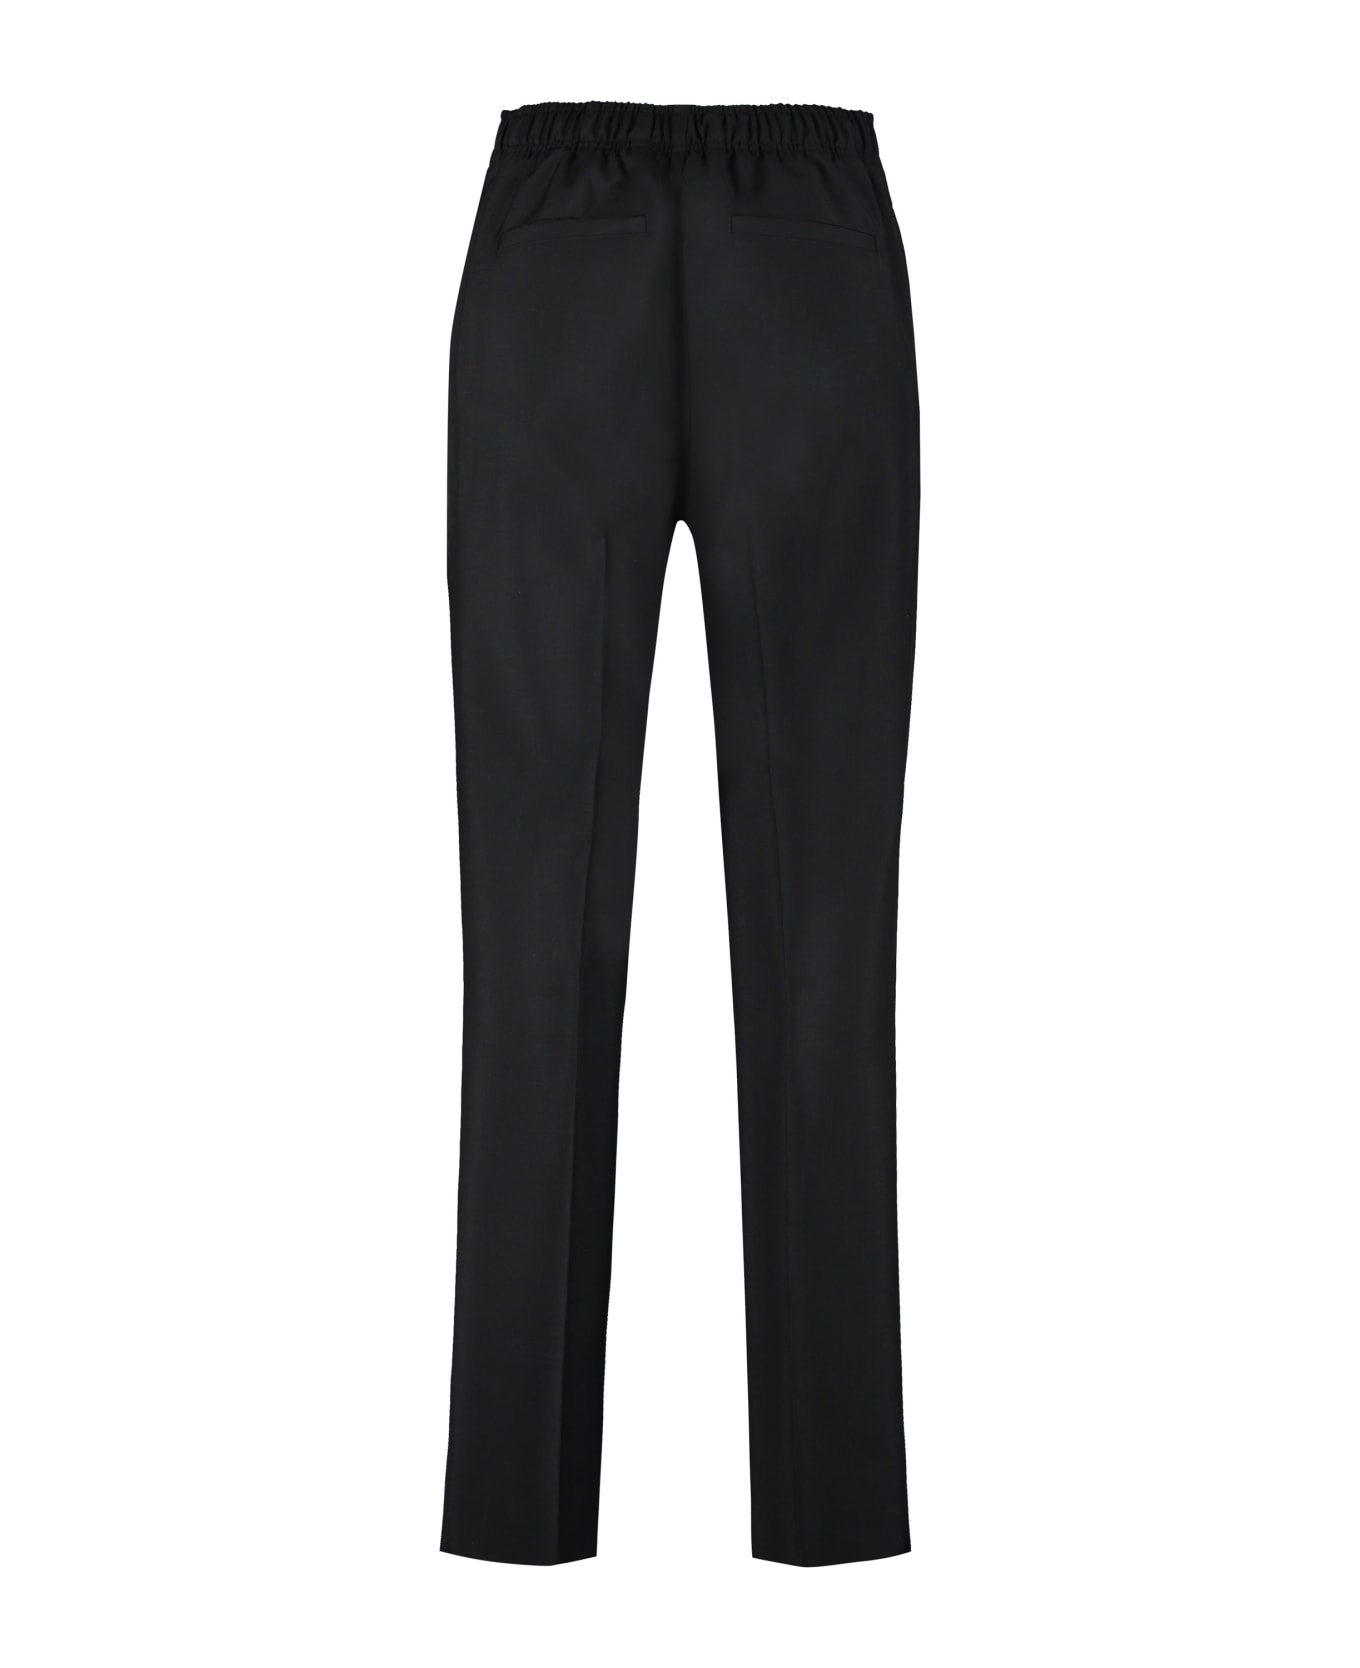 Givenchy Tailored Wool Trousers Stretch-Shorts - BLACK